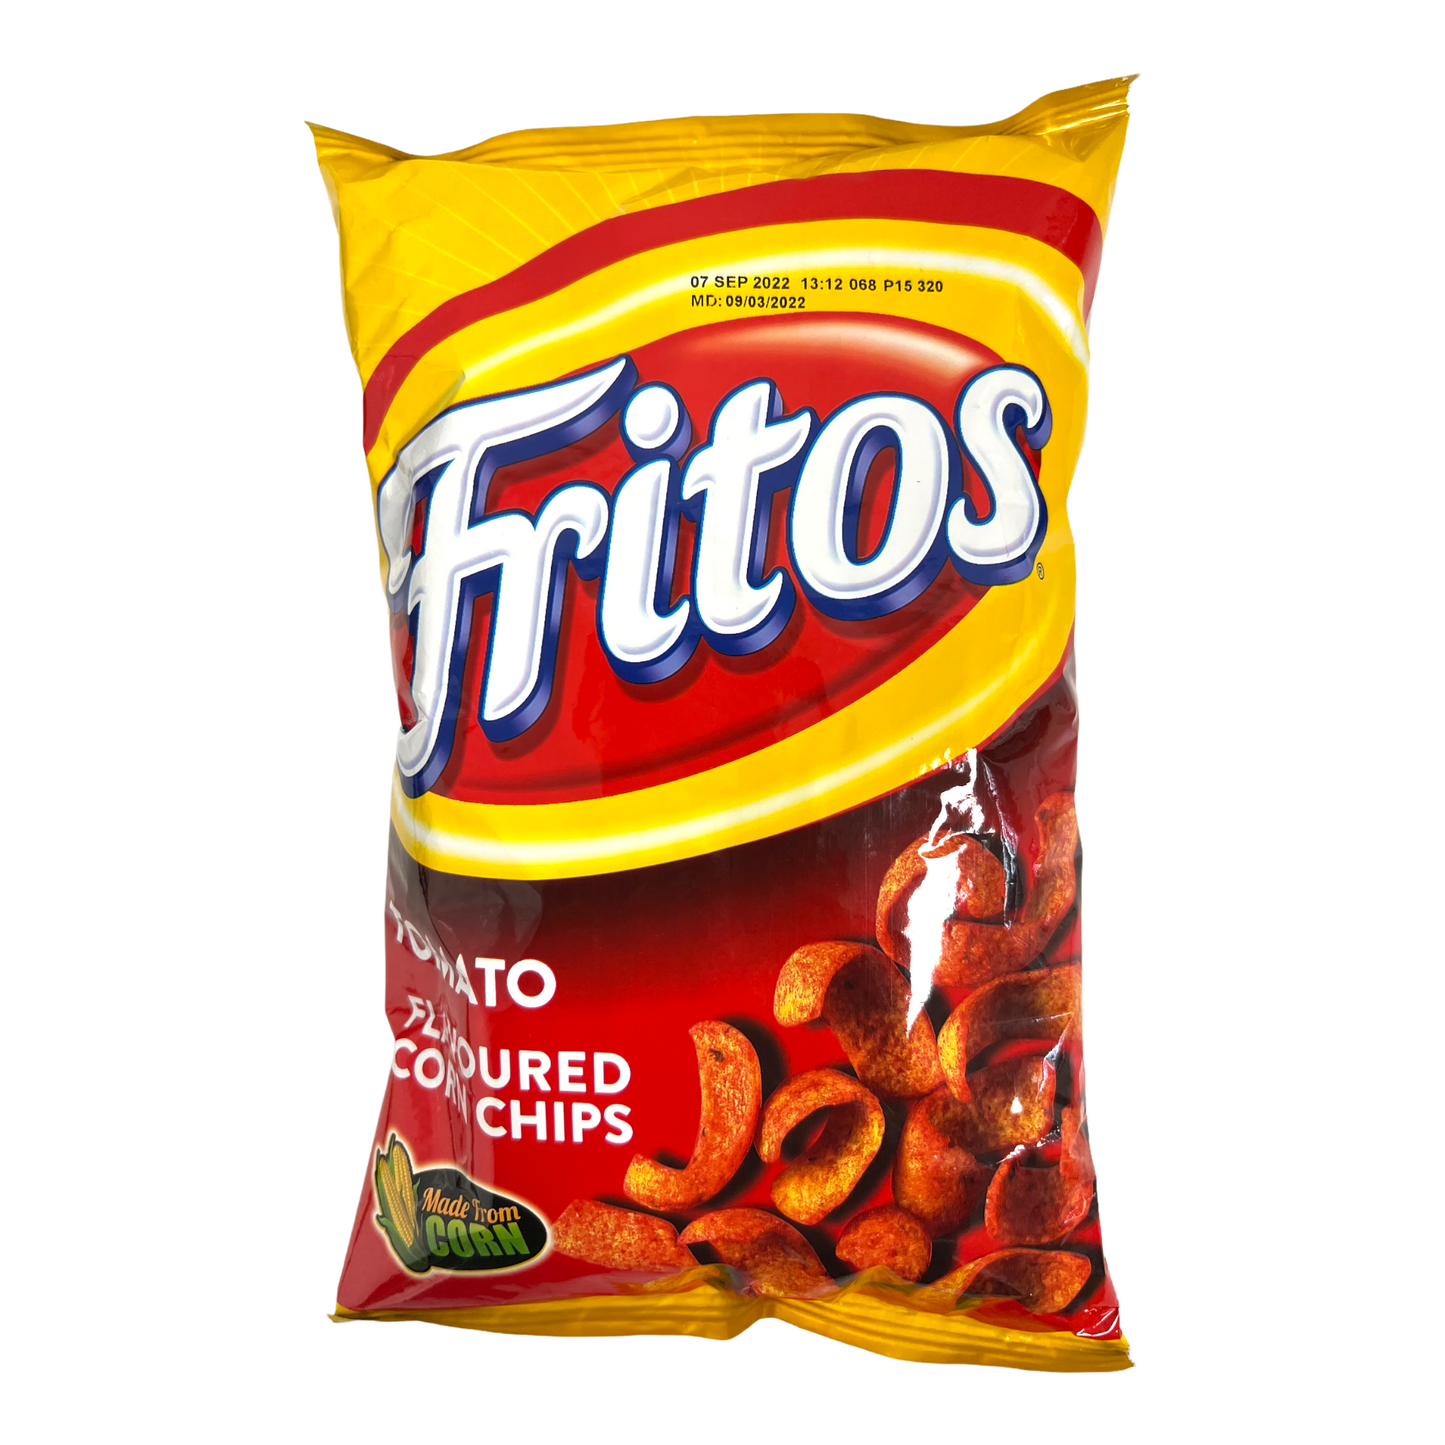 Fritos Tomato Flavoured Corn Chips 120g [South African]